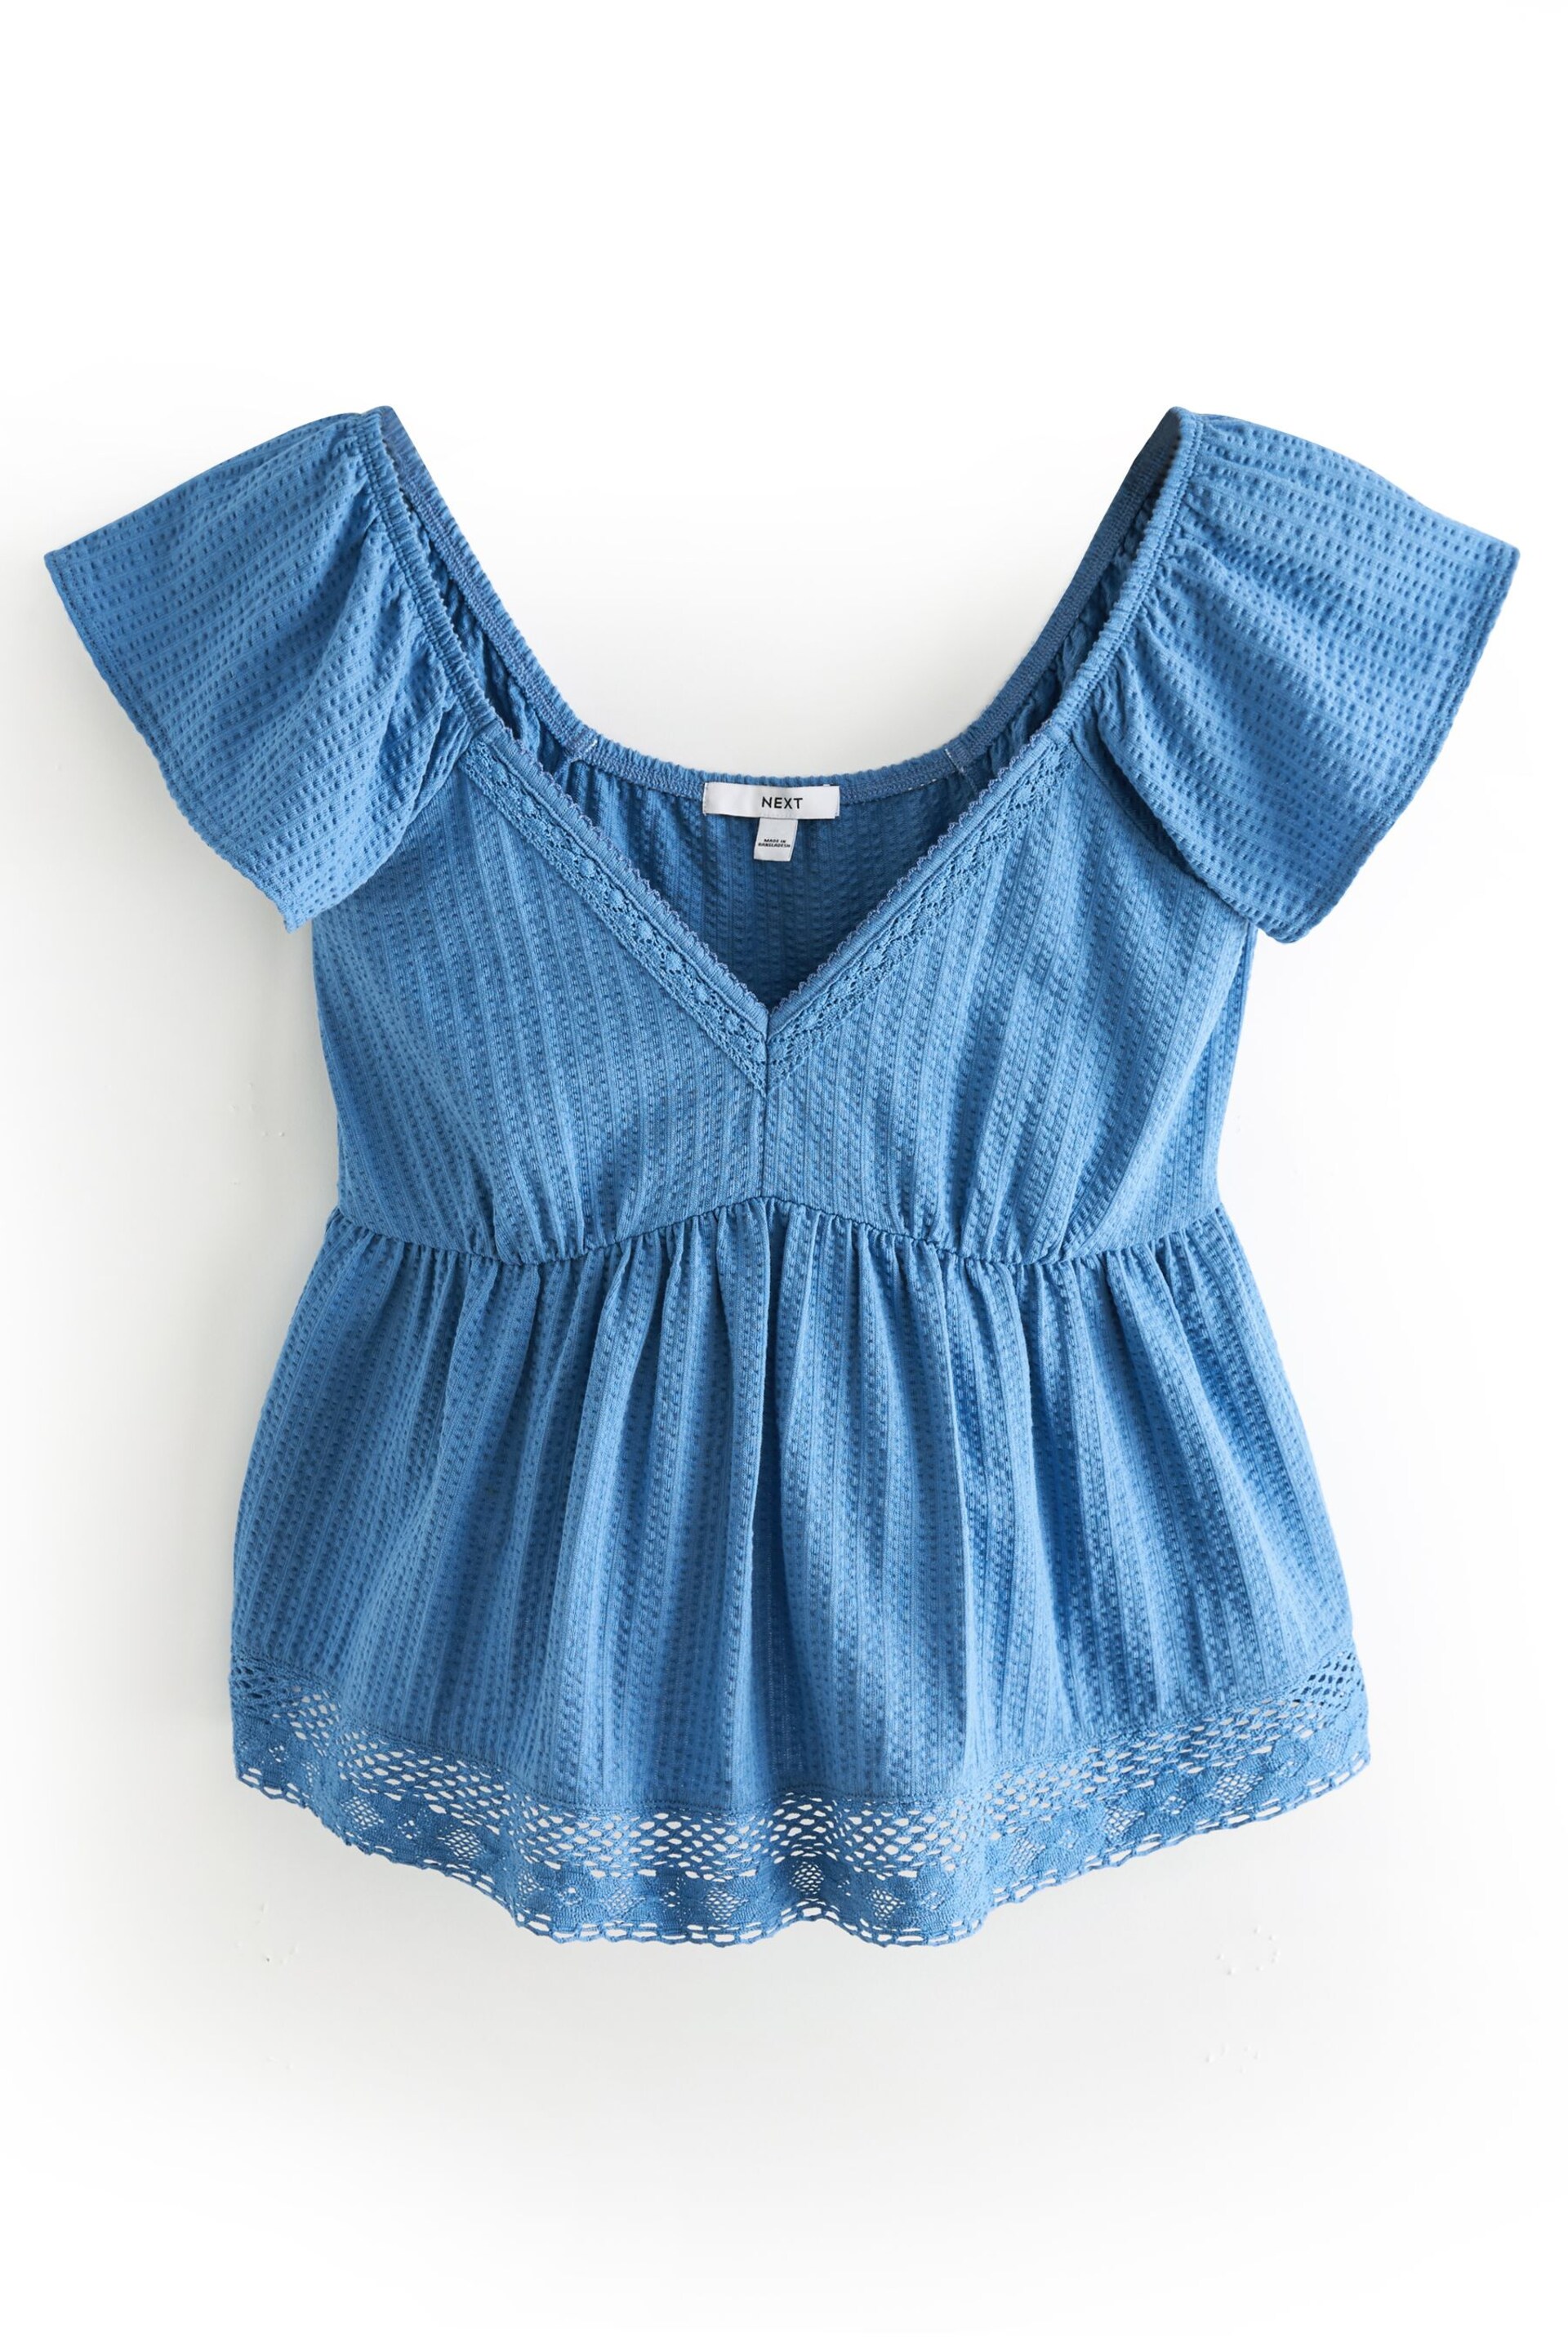 Blue Lace Trim Flutter Sleeve Summer Holiday Top - Image 4 of 5